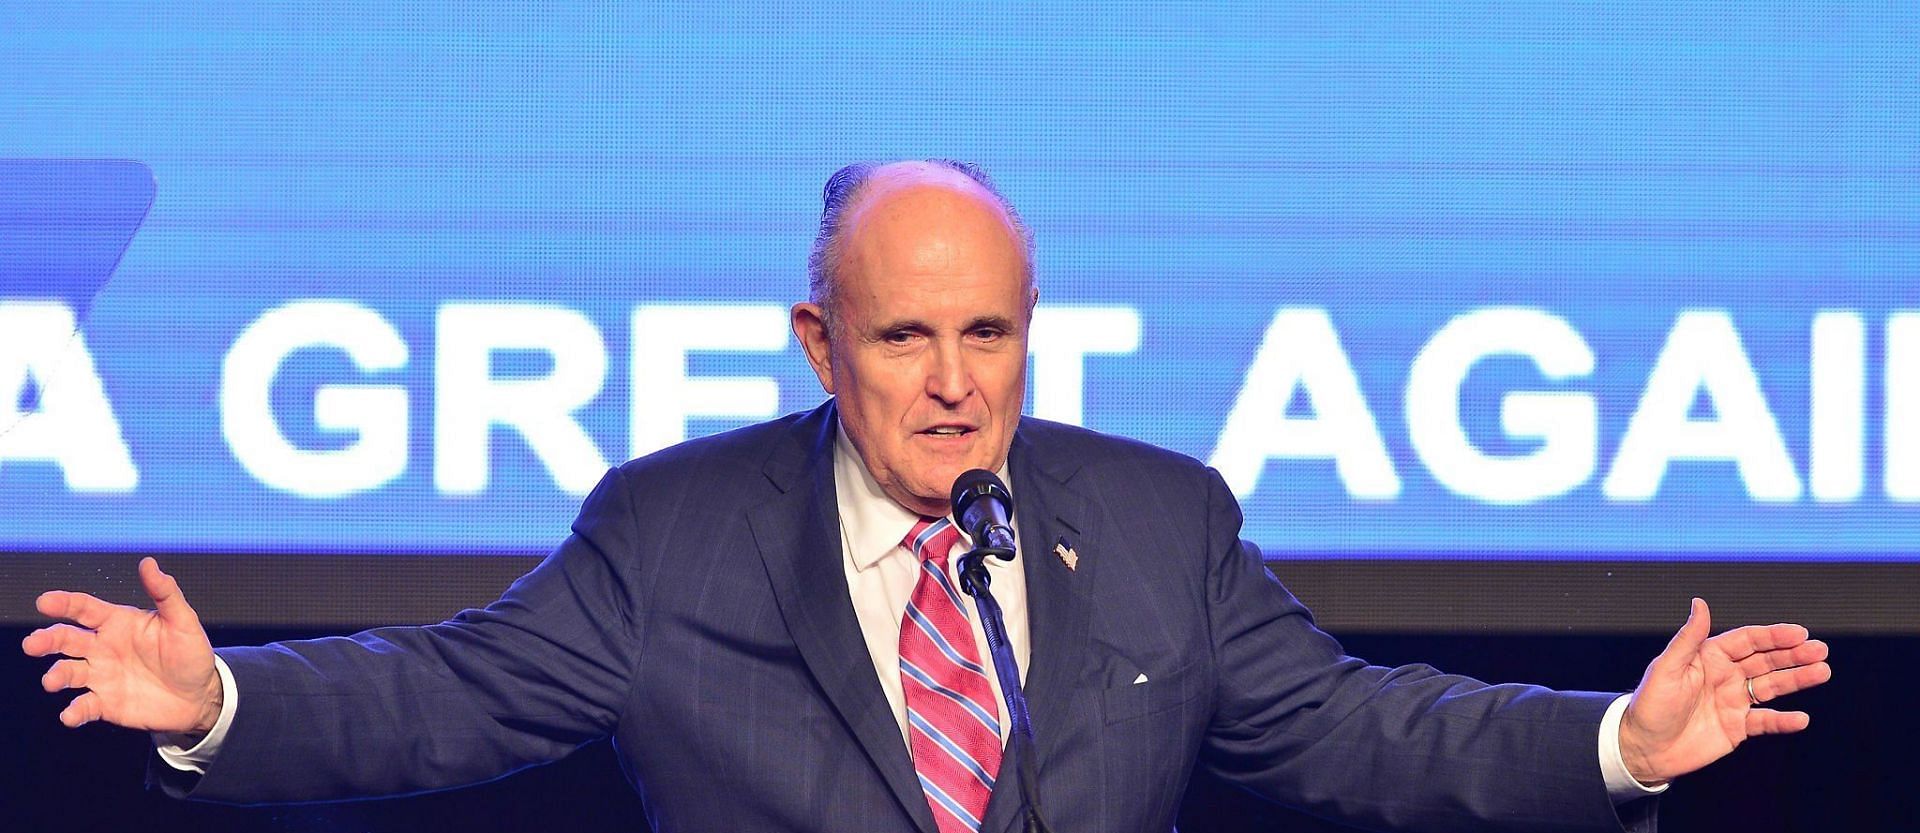 Rudy Giuliani has been married thrice in his life (Image via Johnny Louis/Getty Images)